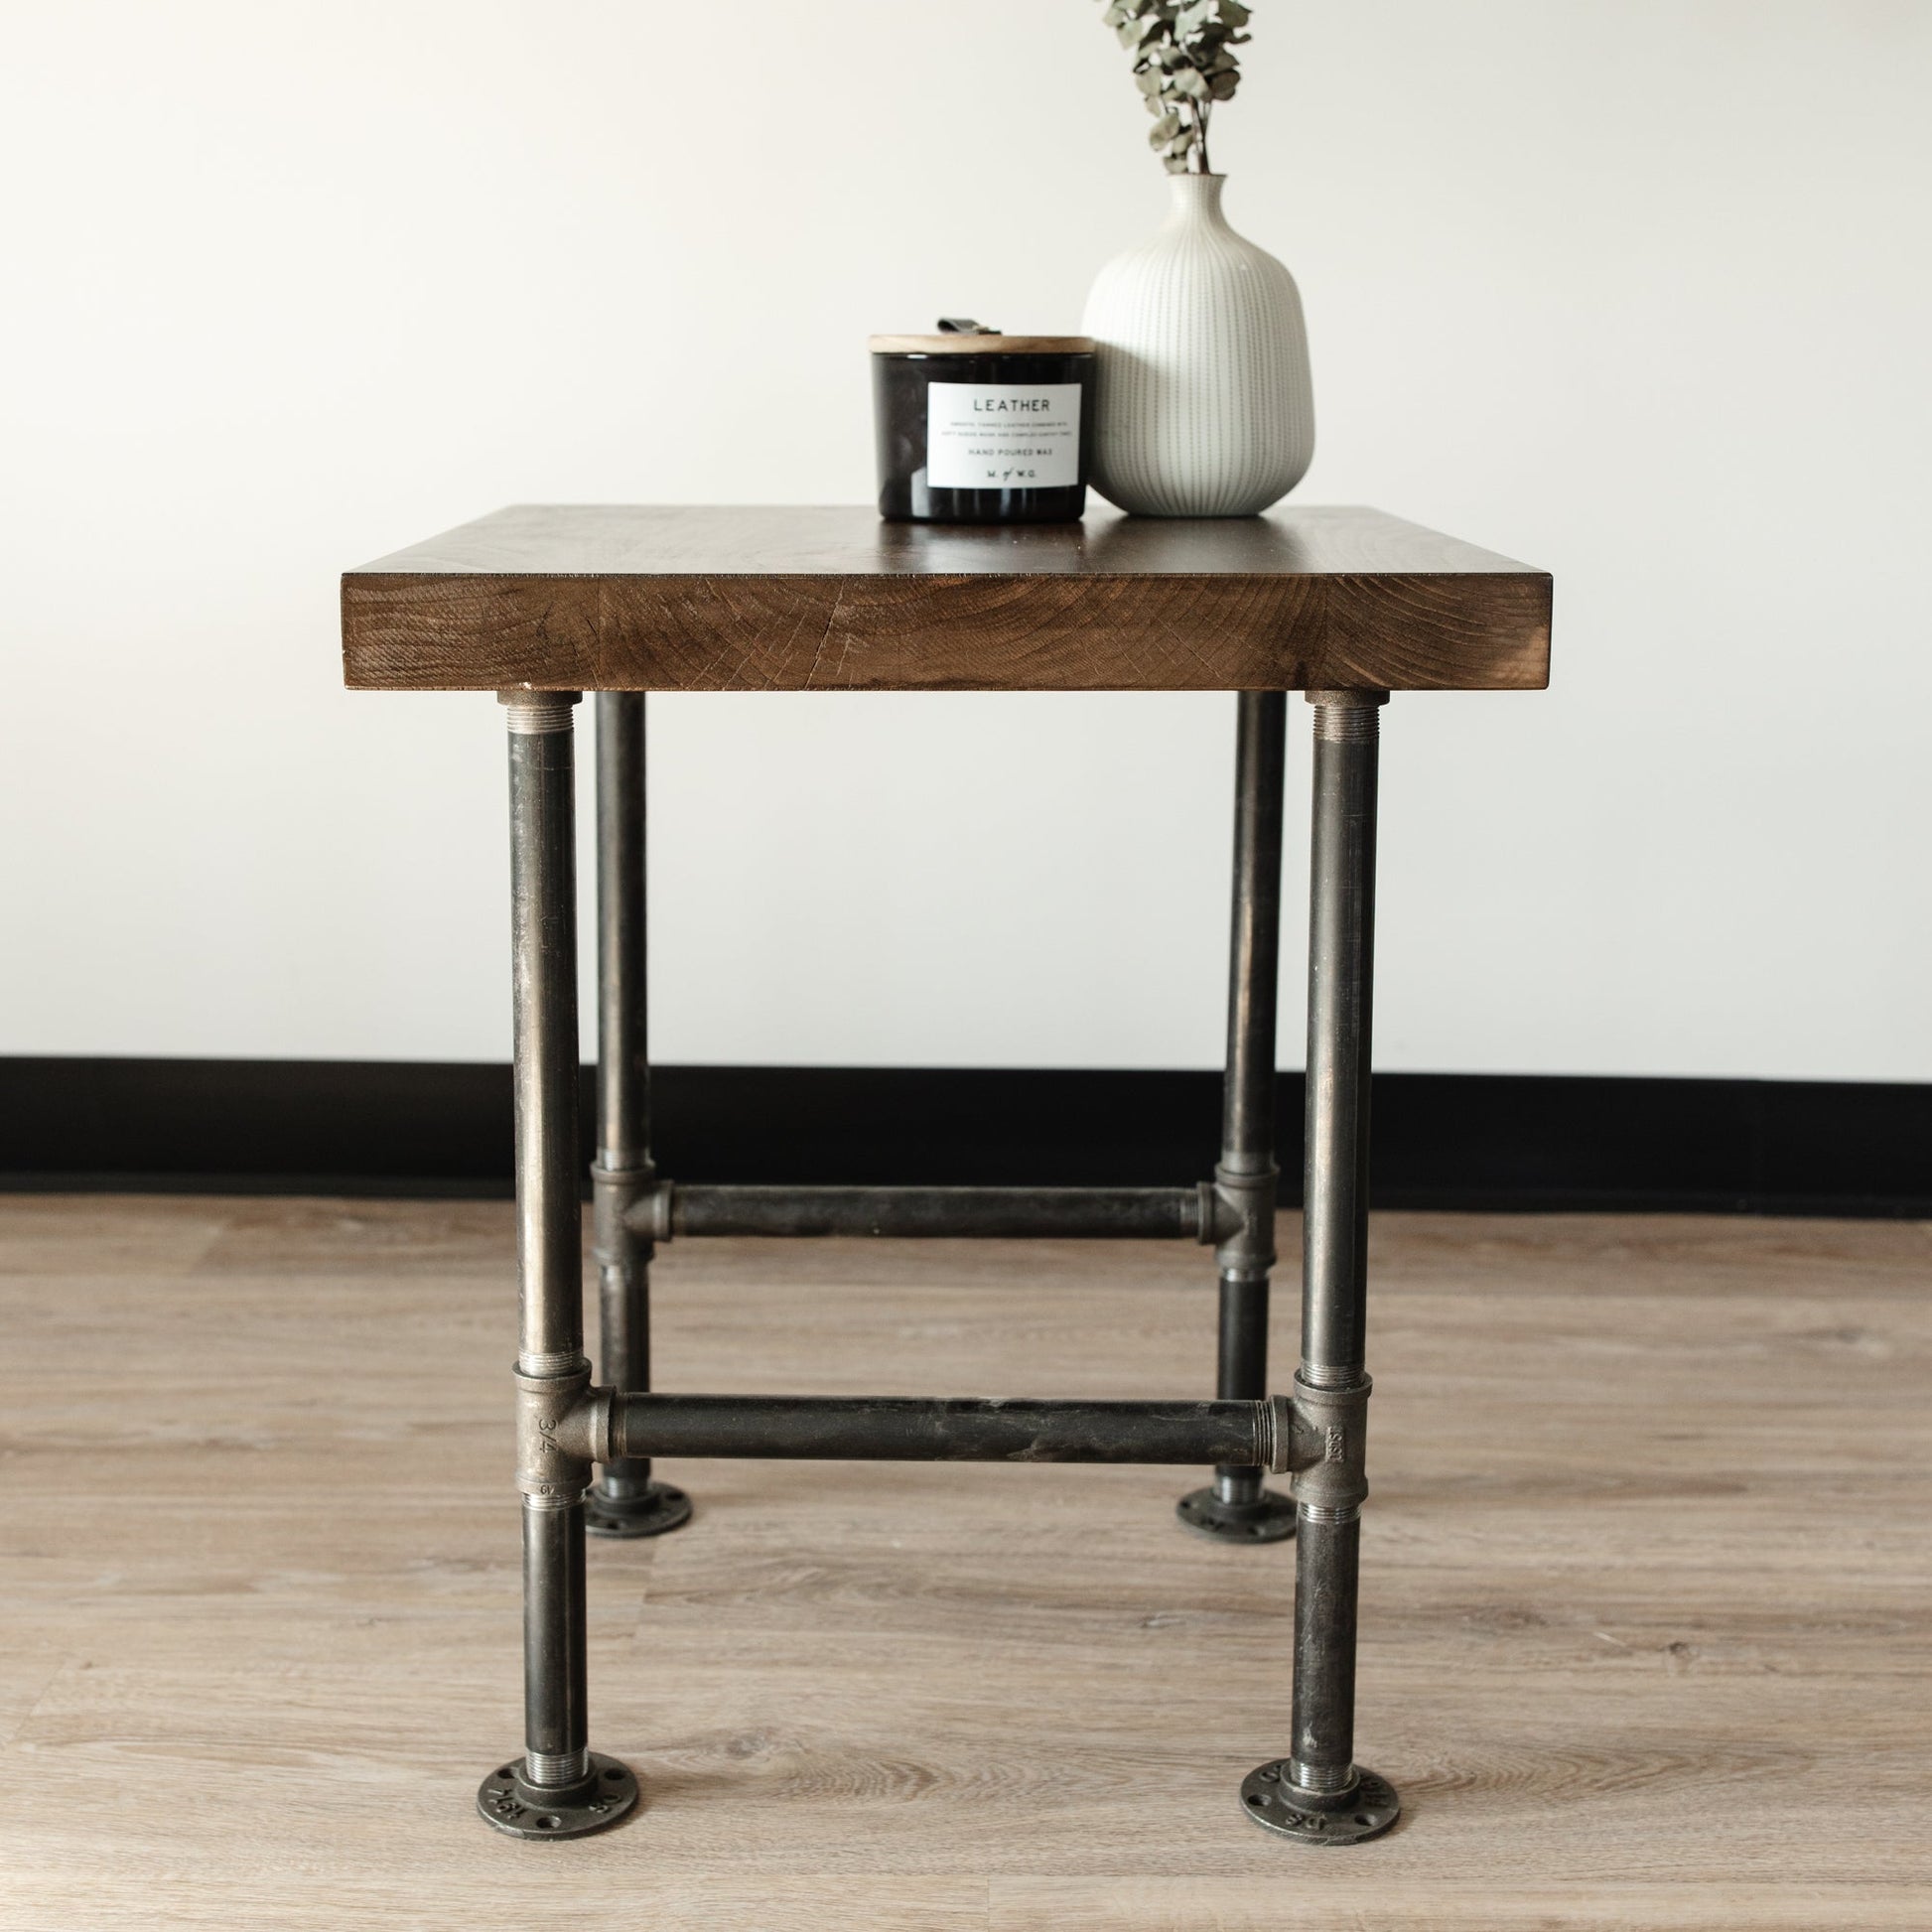 The Industrial Hardwood End Table - FargoWoodworks